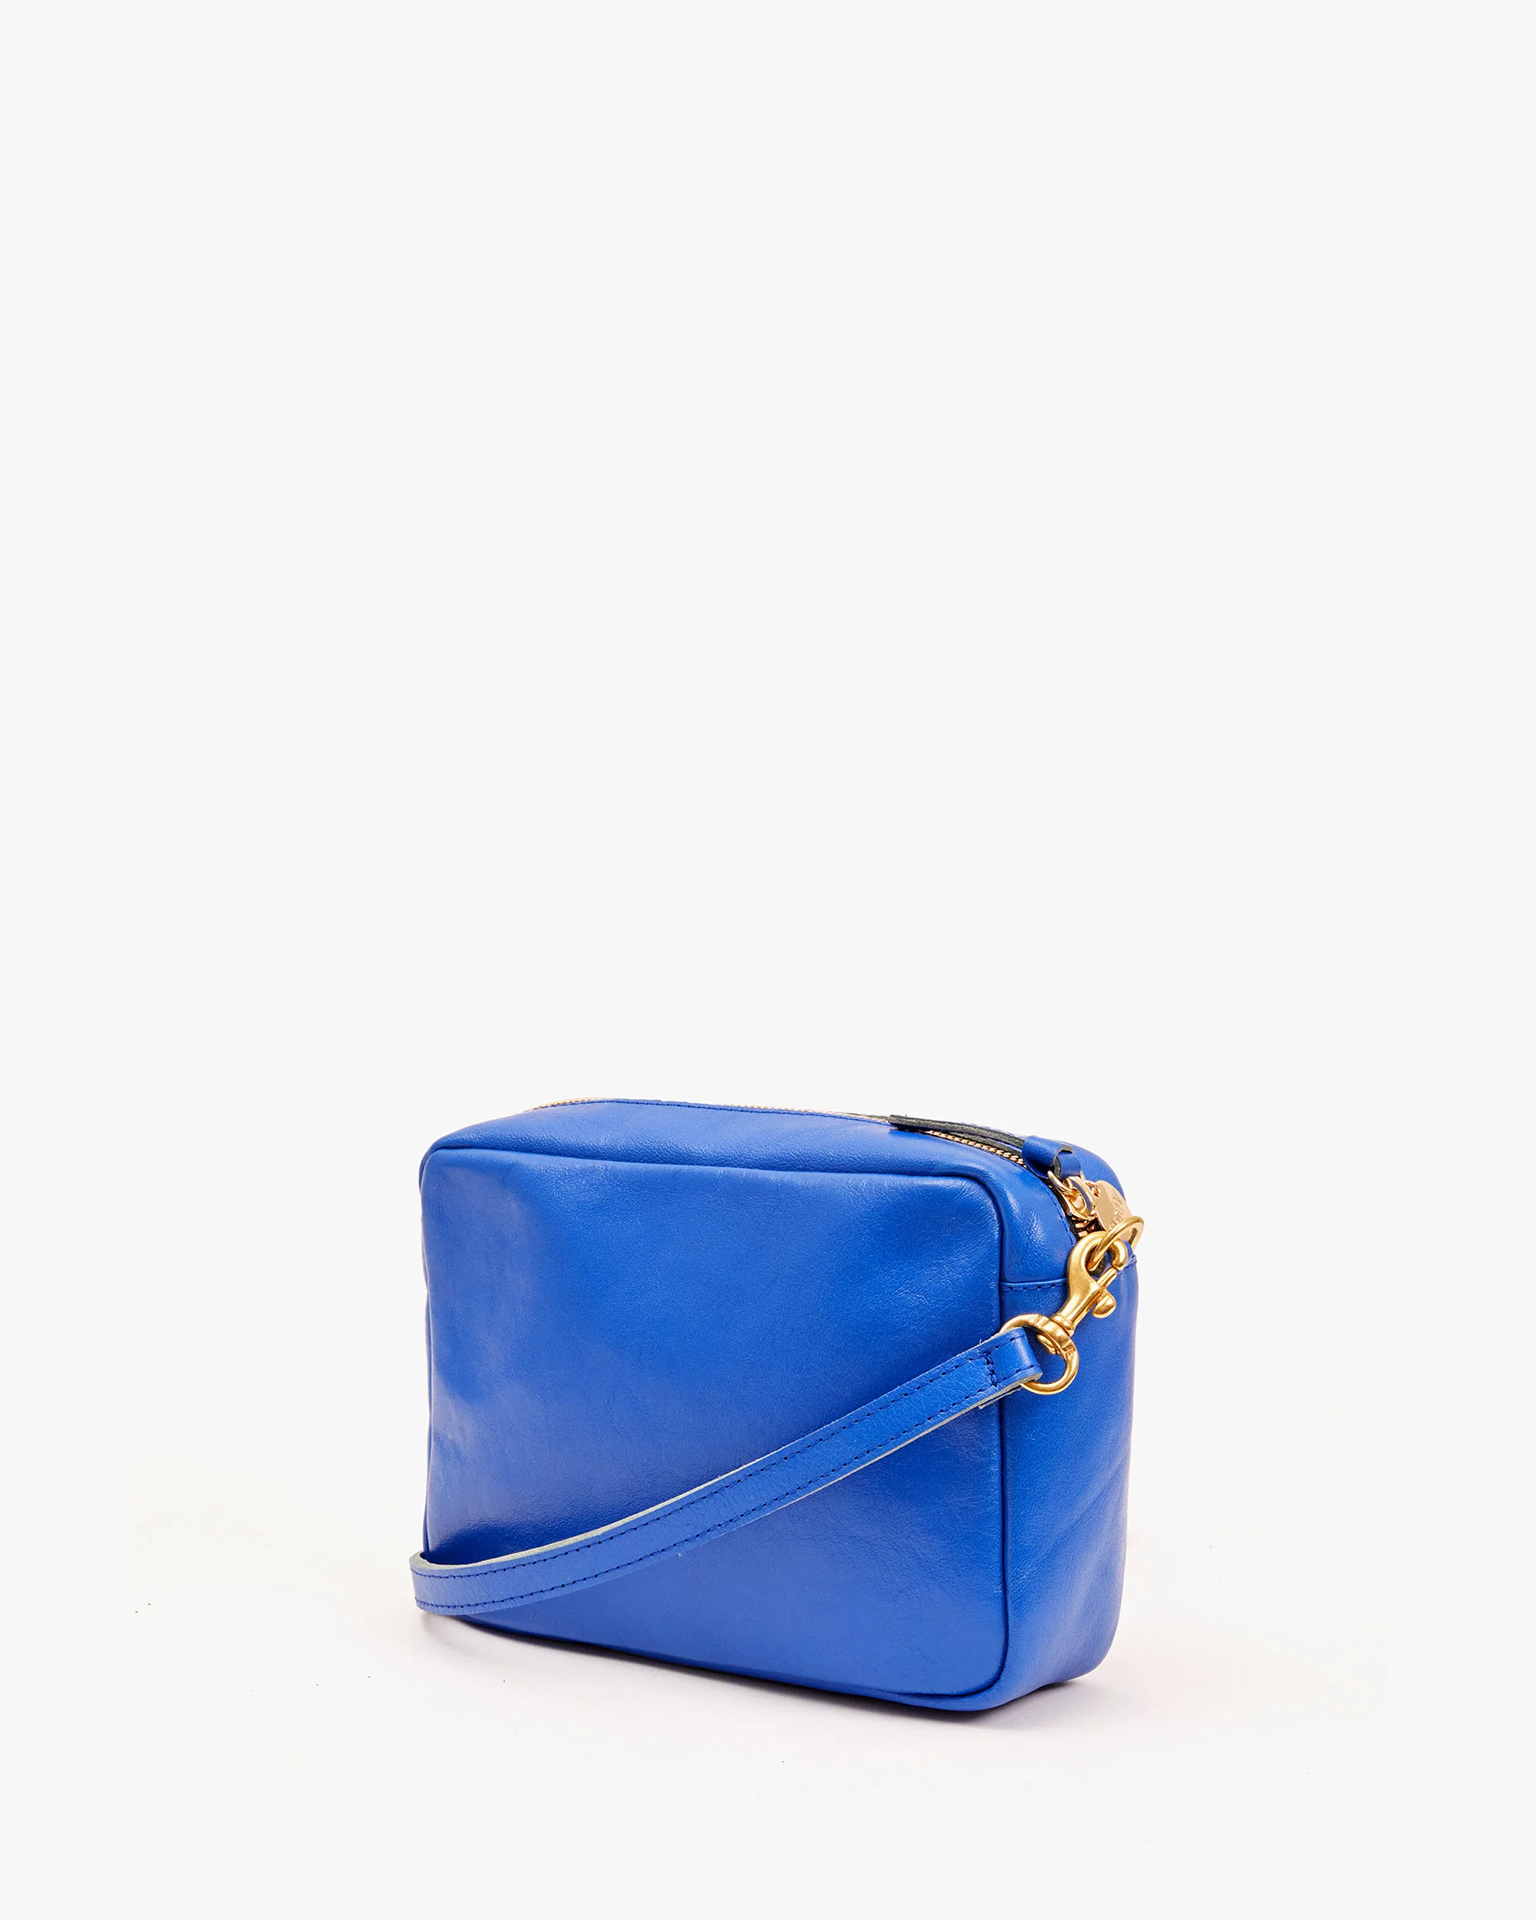 clare v wallet clutch - electric blue – Eloise